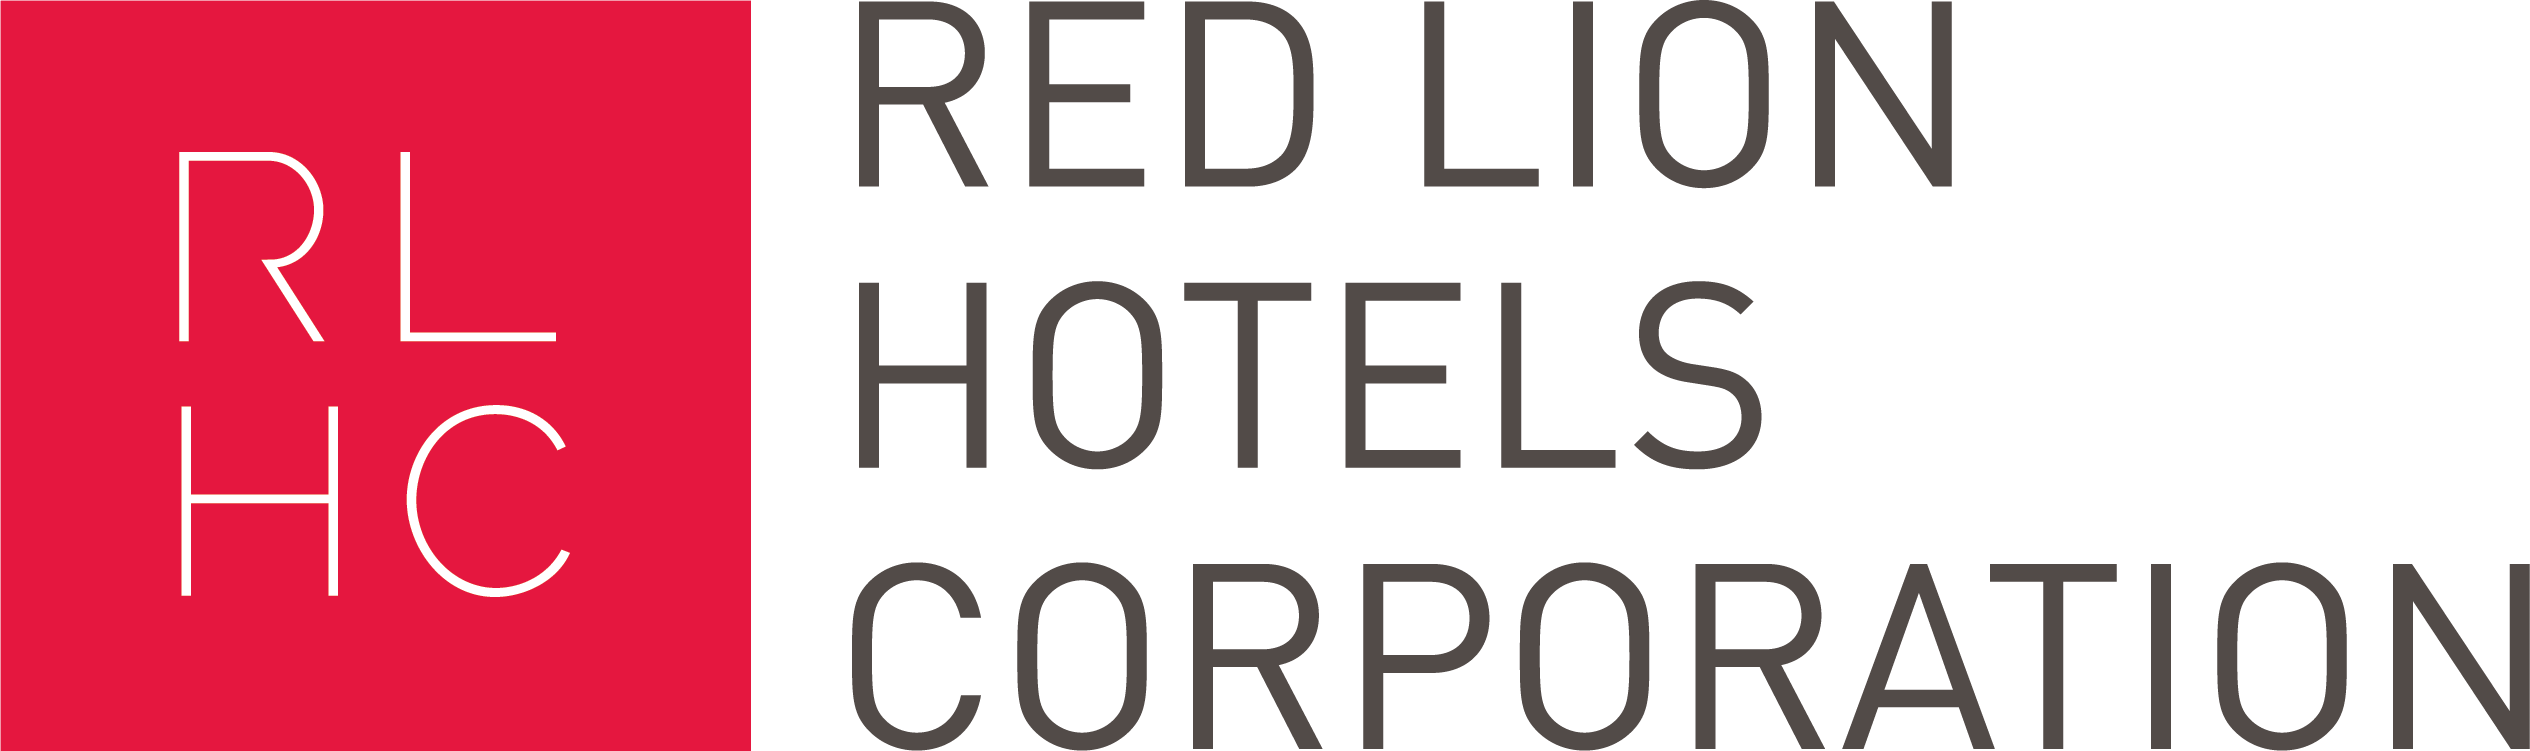 Lion Hotel Logo - Red Lion Hotels Corp logo